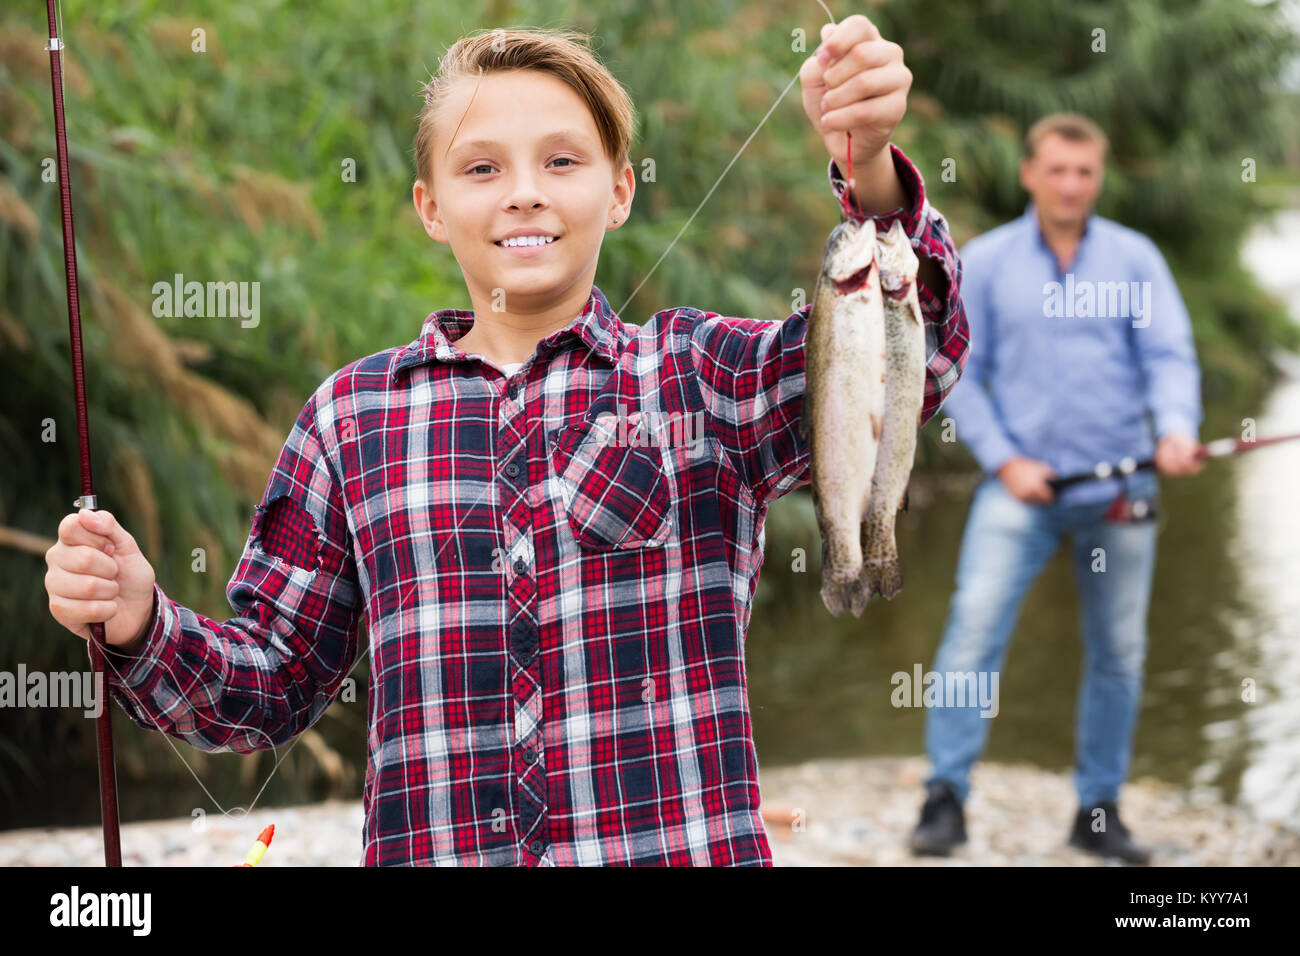 https://c8.alamy.com/comp/KYY7A1/smiling-teenage-boy-releasing-catch-on-hook-fish-on-forest-KYY7A1.jpg